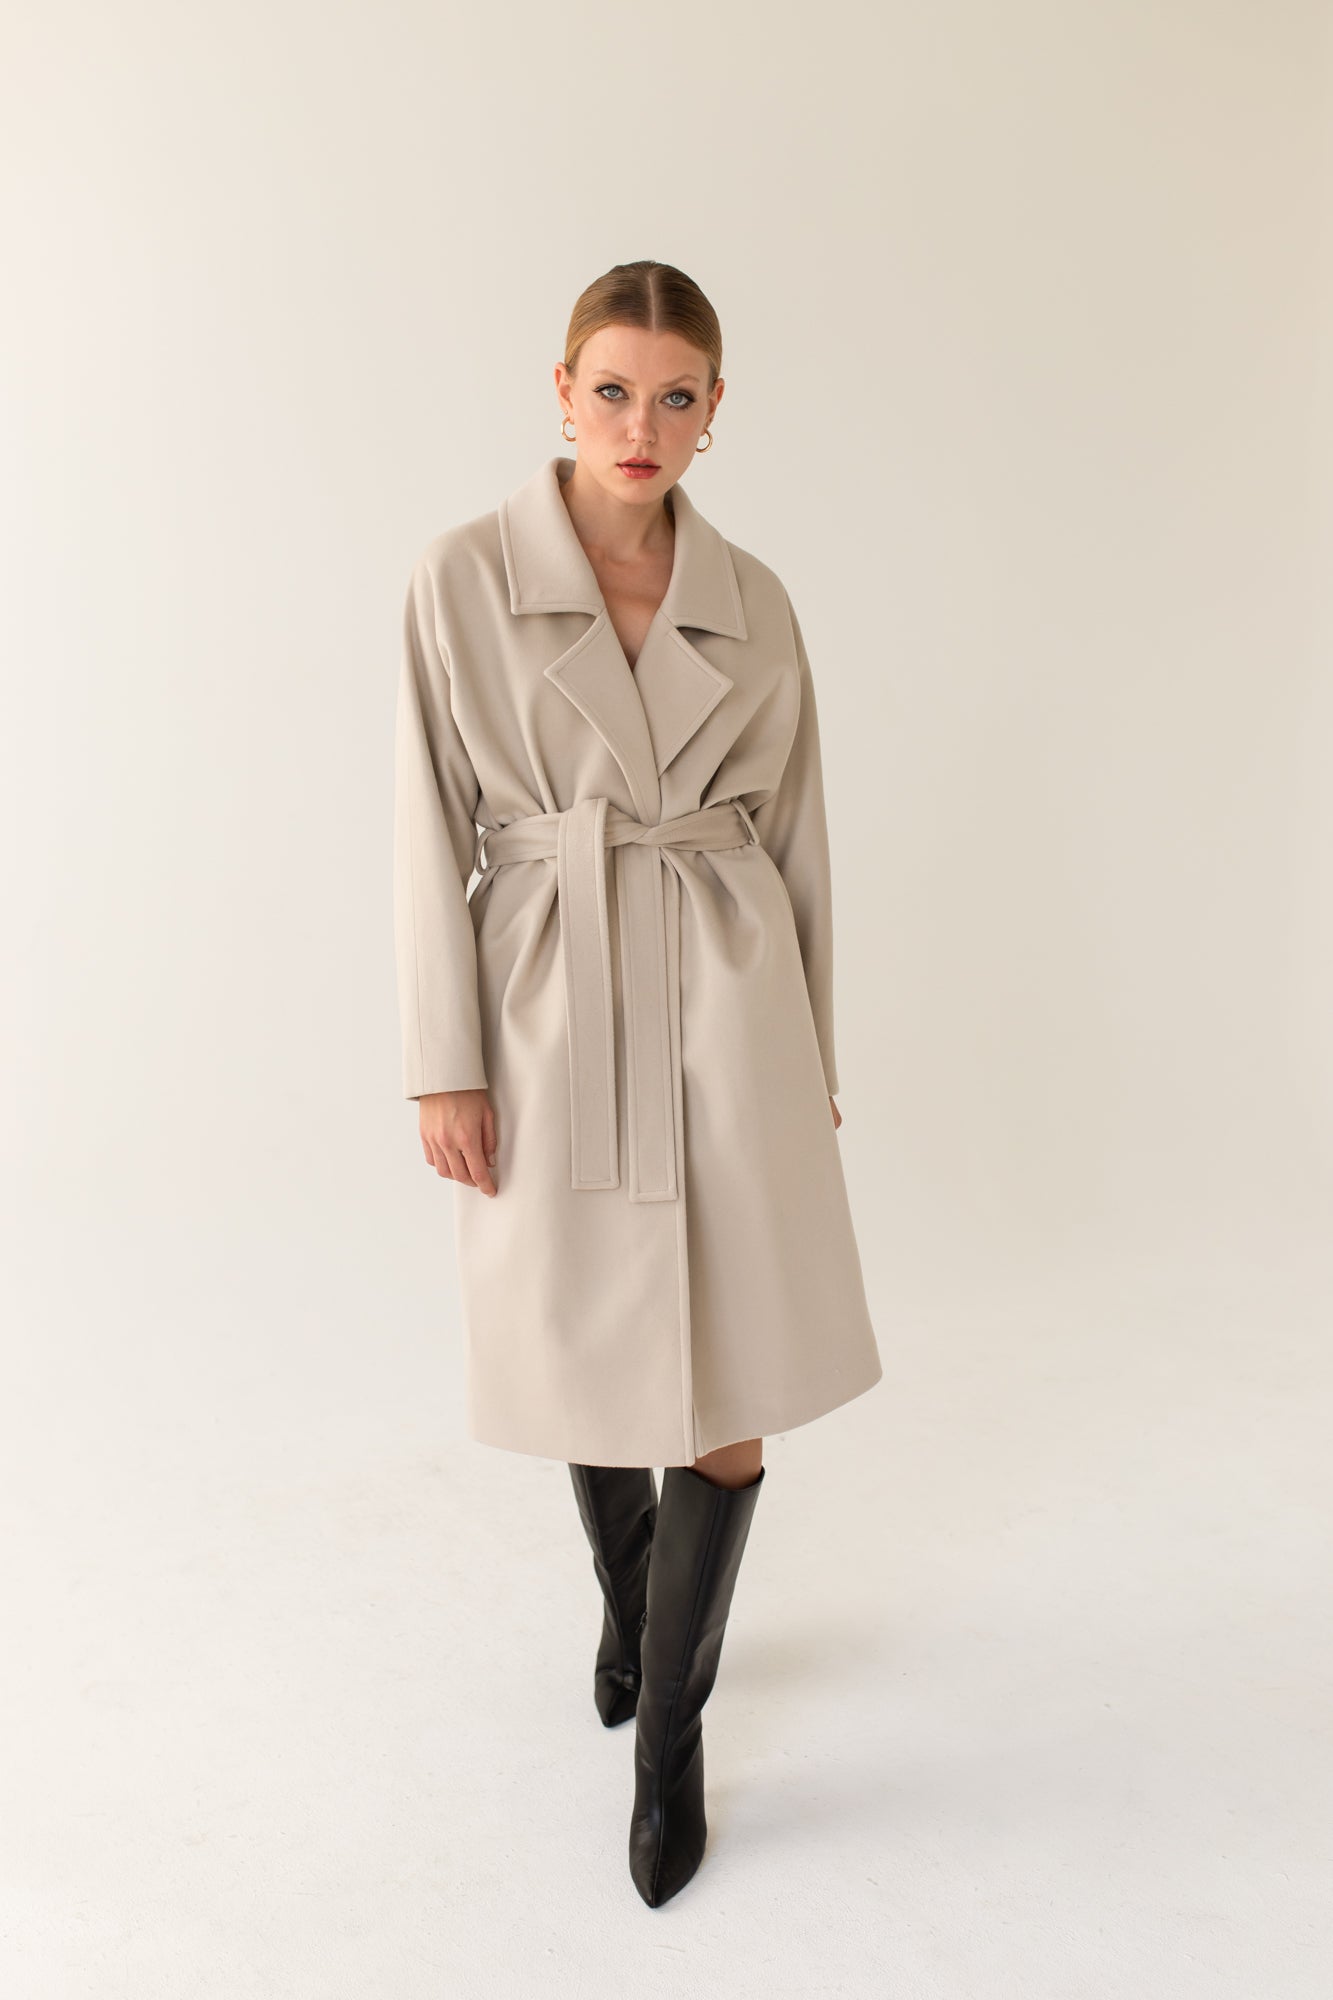 Discover sustainably made Oversize Light Beige Cashmere Wool Coat